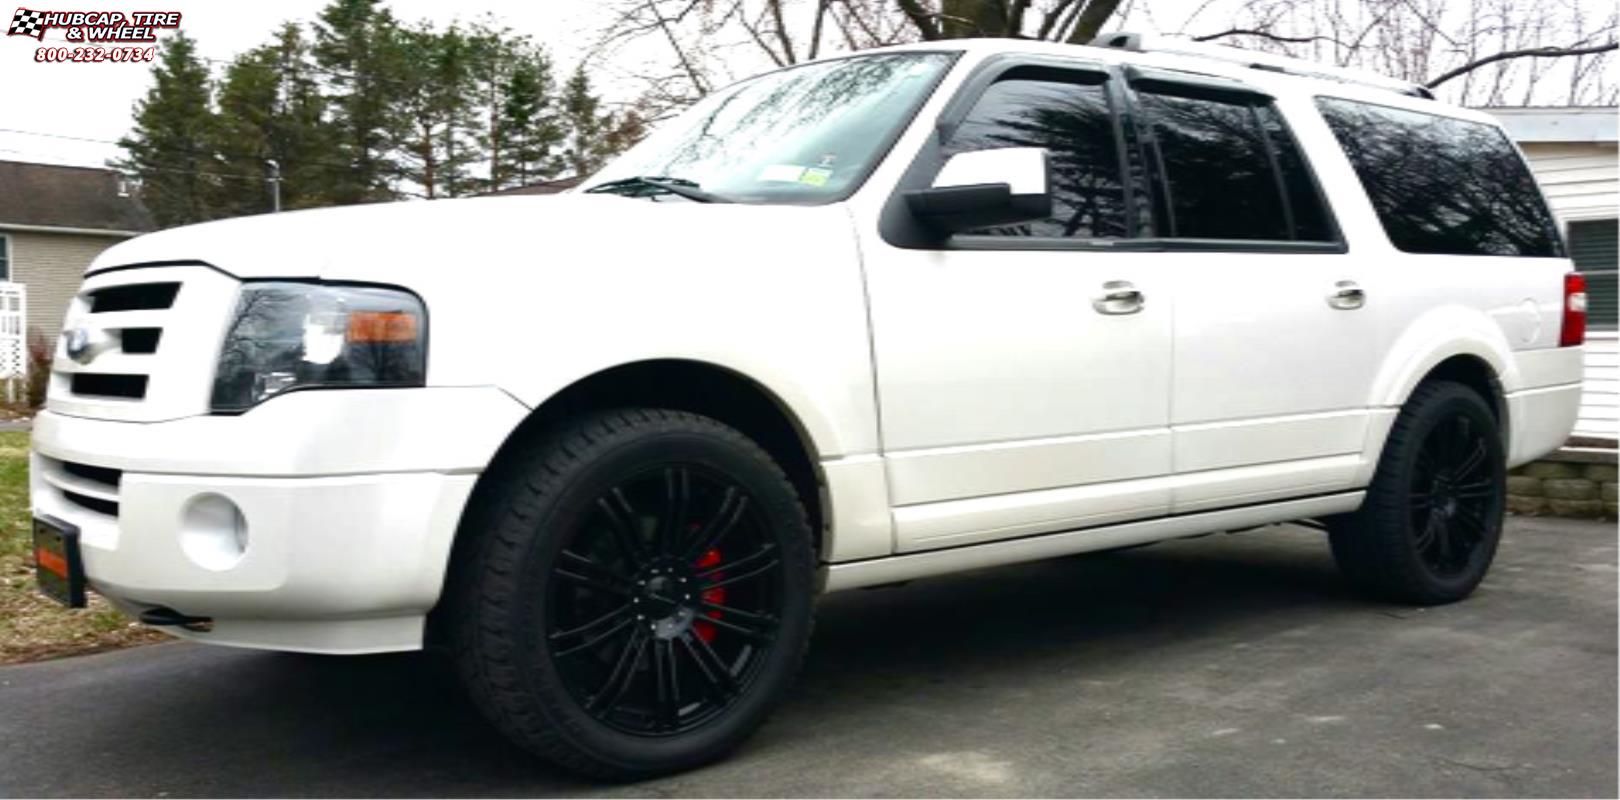 vehicle gallery/ford expedition xd series km677 d2  Gloss Black wheels and rims